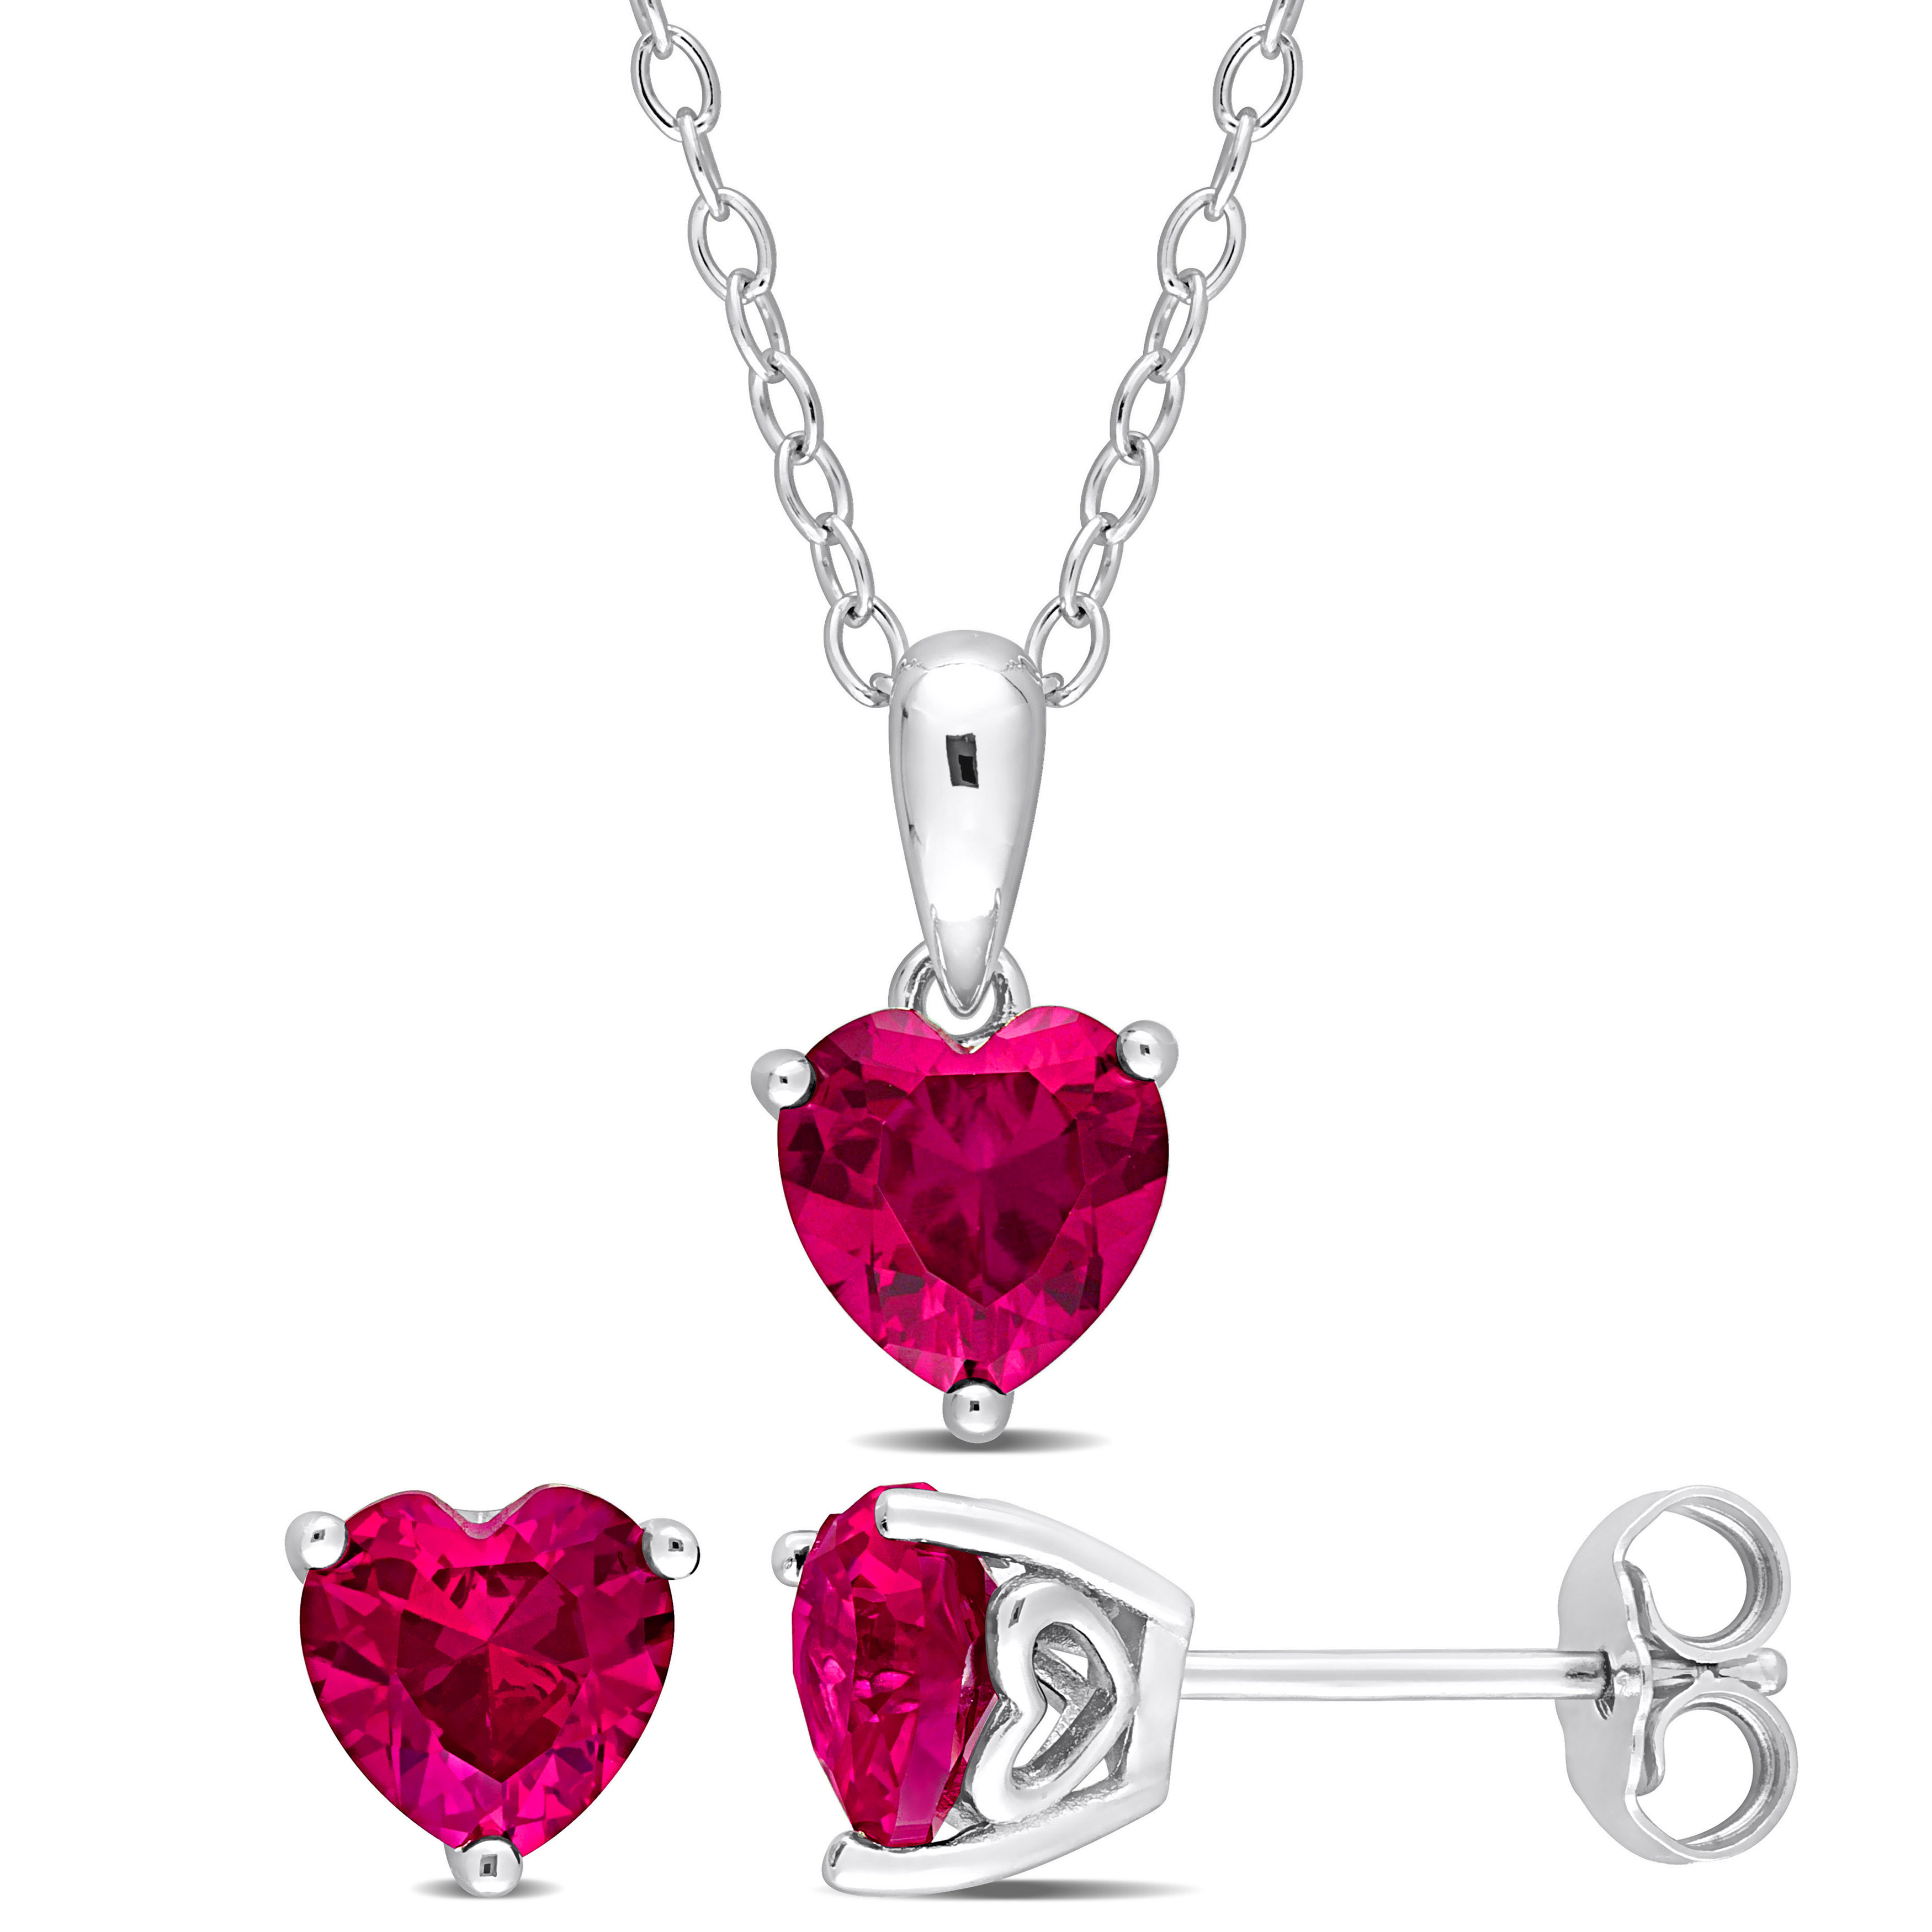 3 CT TGW Heart-Shape Created Ruby 2-Piece Set of Pendant with Chain and Earrings in Sterling Silver